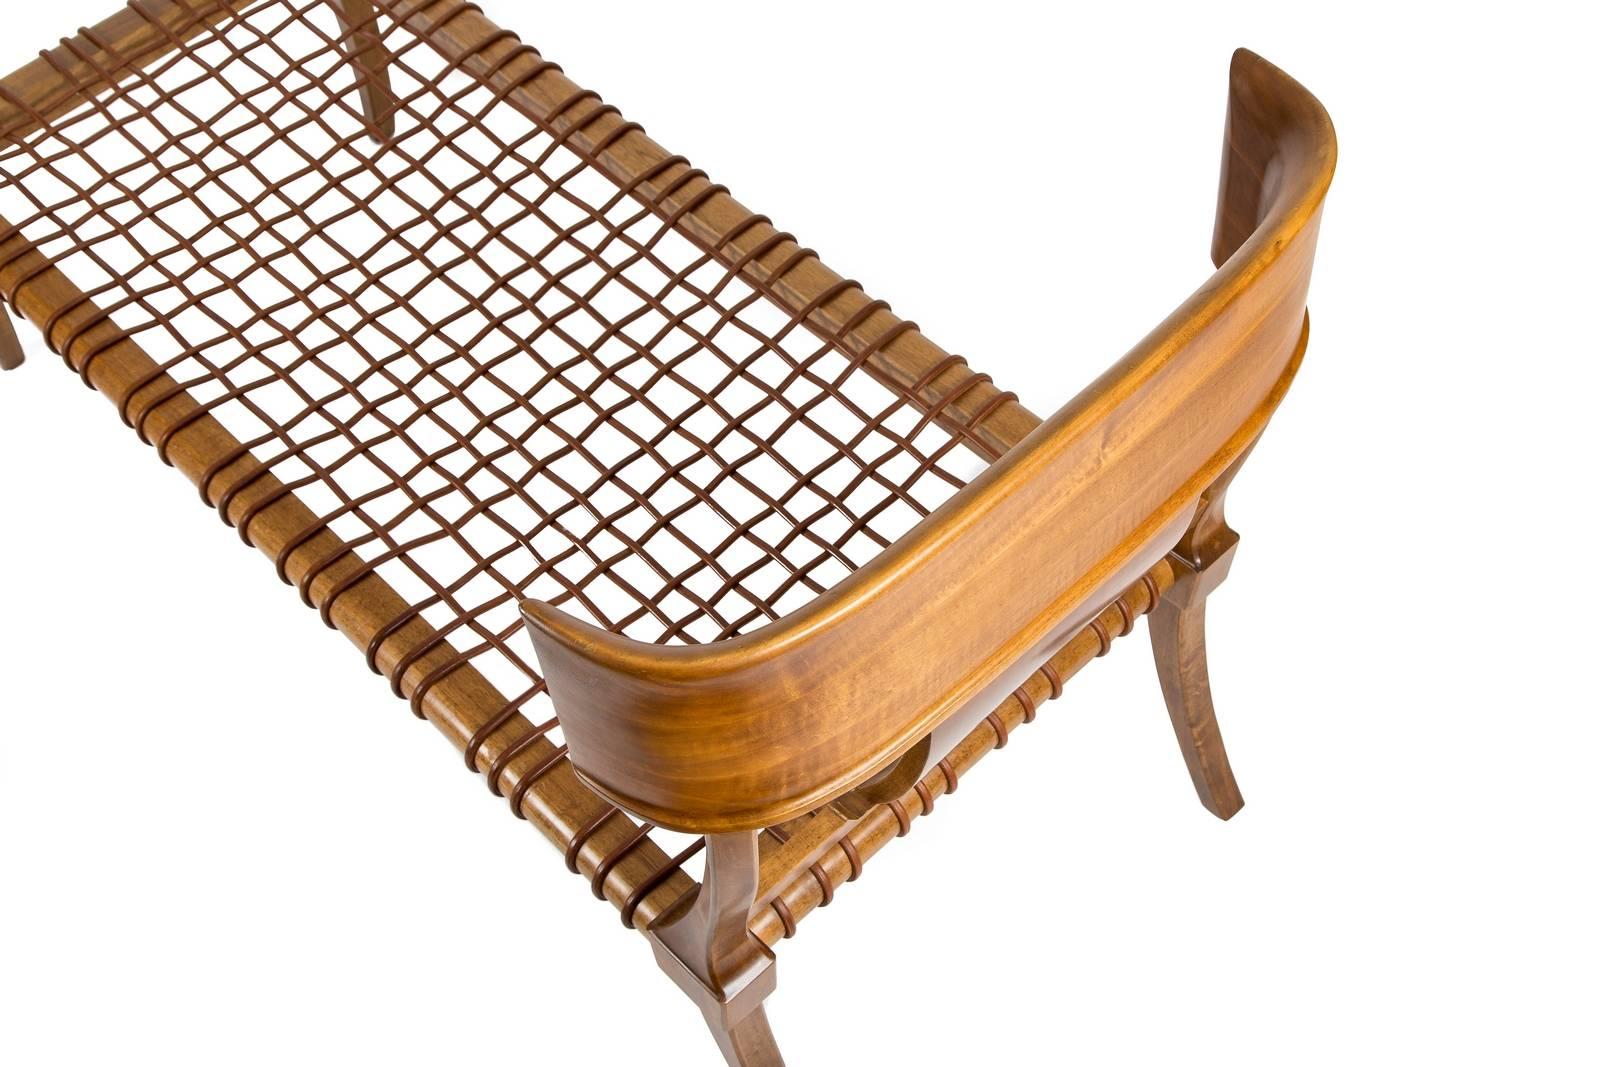 Chaise Longue by T.H. Robsjohn-Gibbings for Saridis of Athens 1